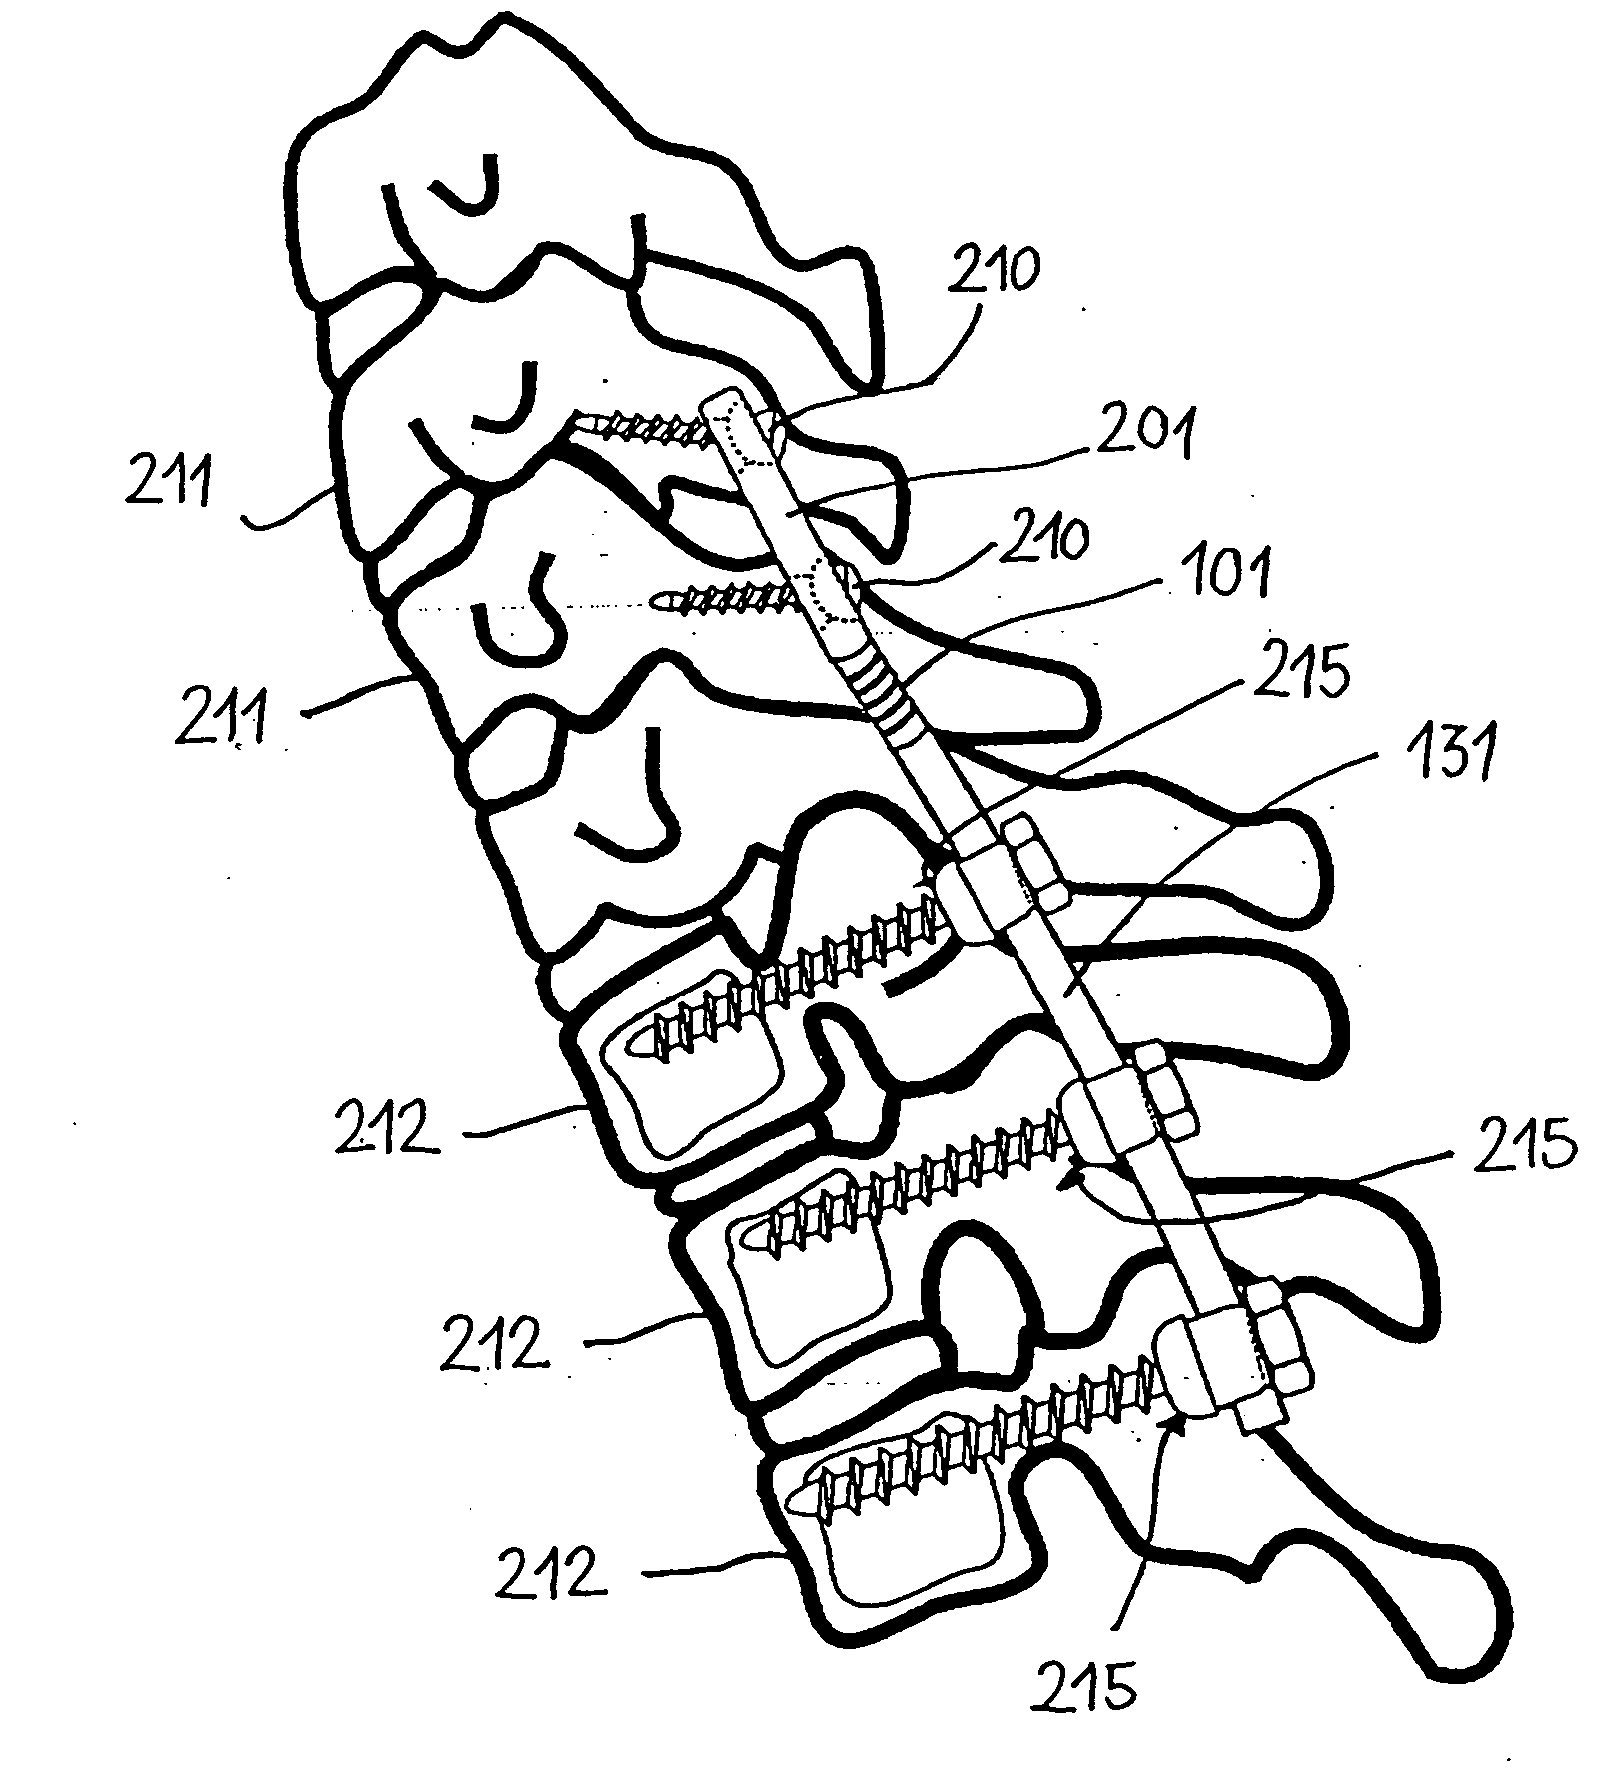 Stabilization device for bones comprising a spring element and manufacturing method for said spring element